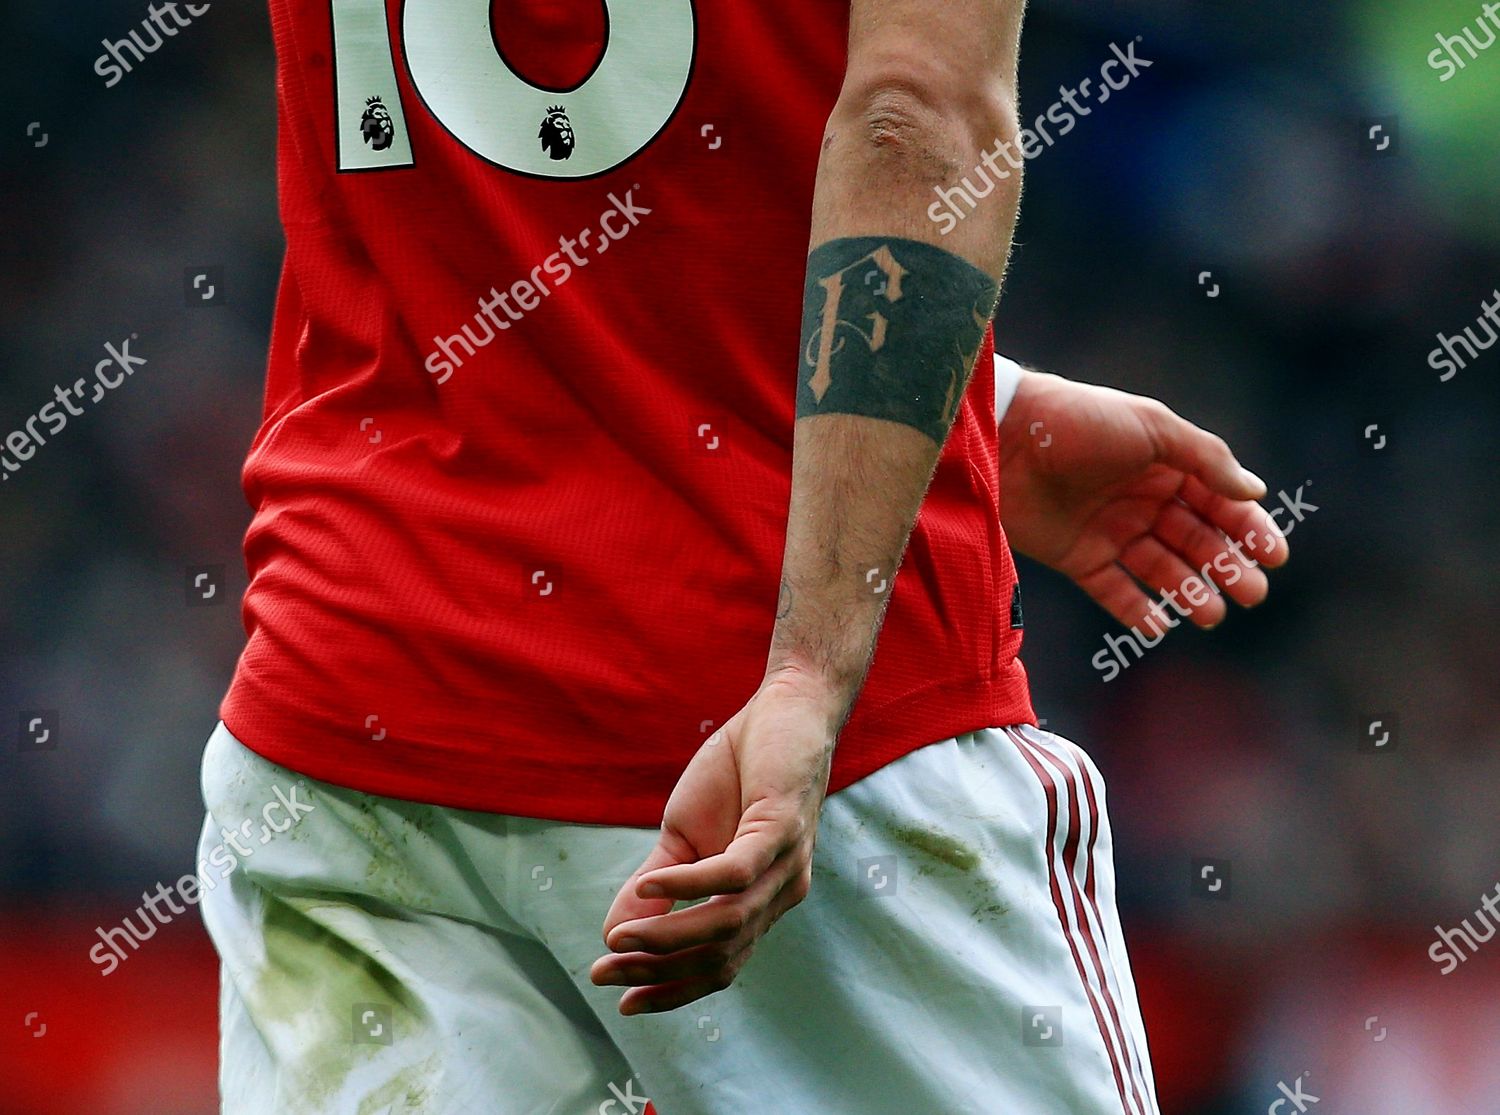 ESPN UK  Spotted at Old Trafford  A Manchester United fan with a tattoo  of Juventus forward Cristiano Ronaldo playing for Real Madrid CF   Facebook